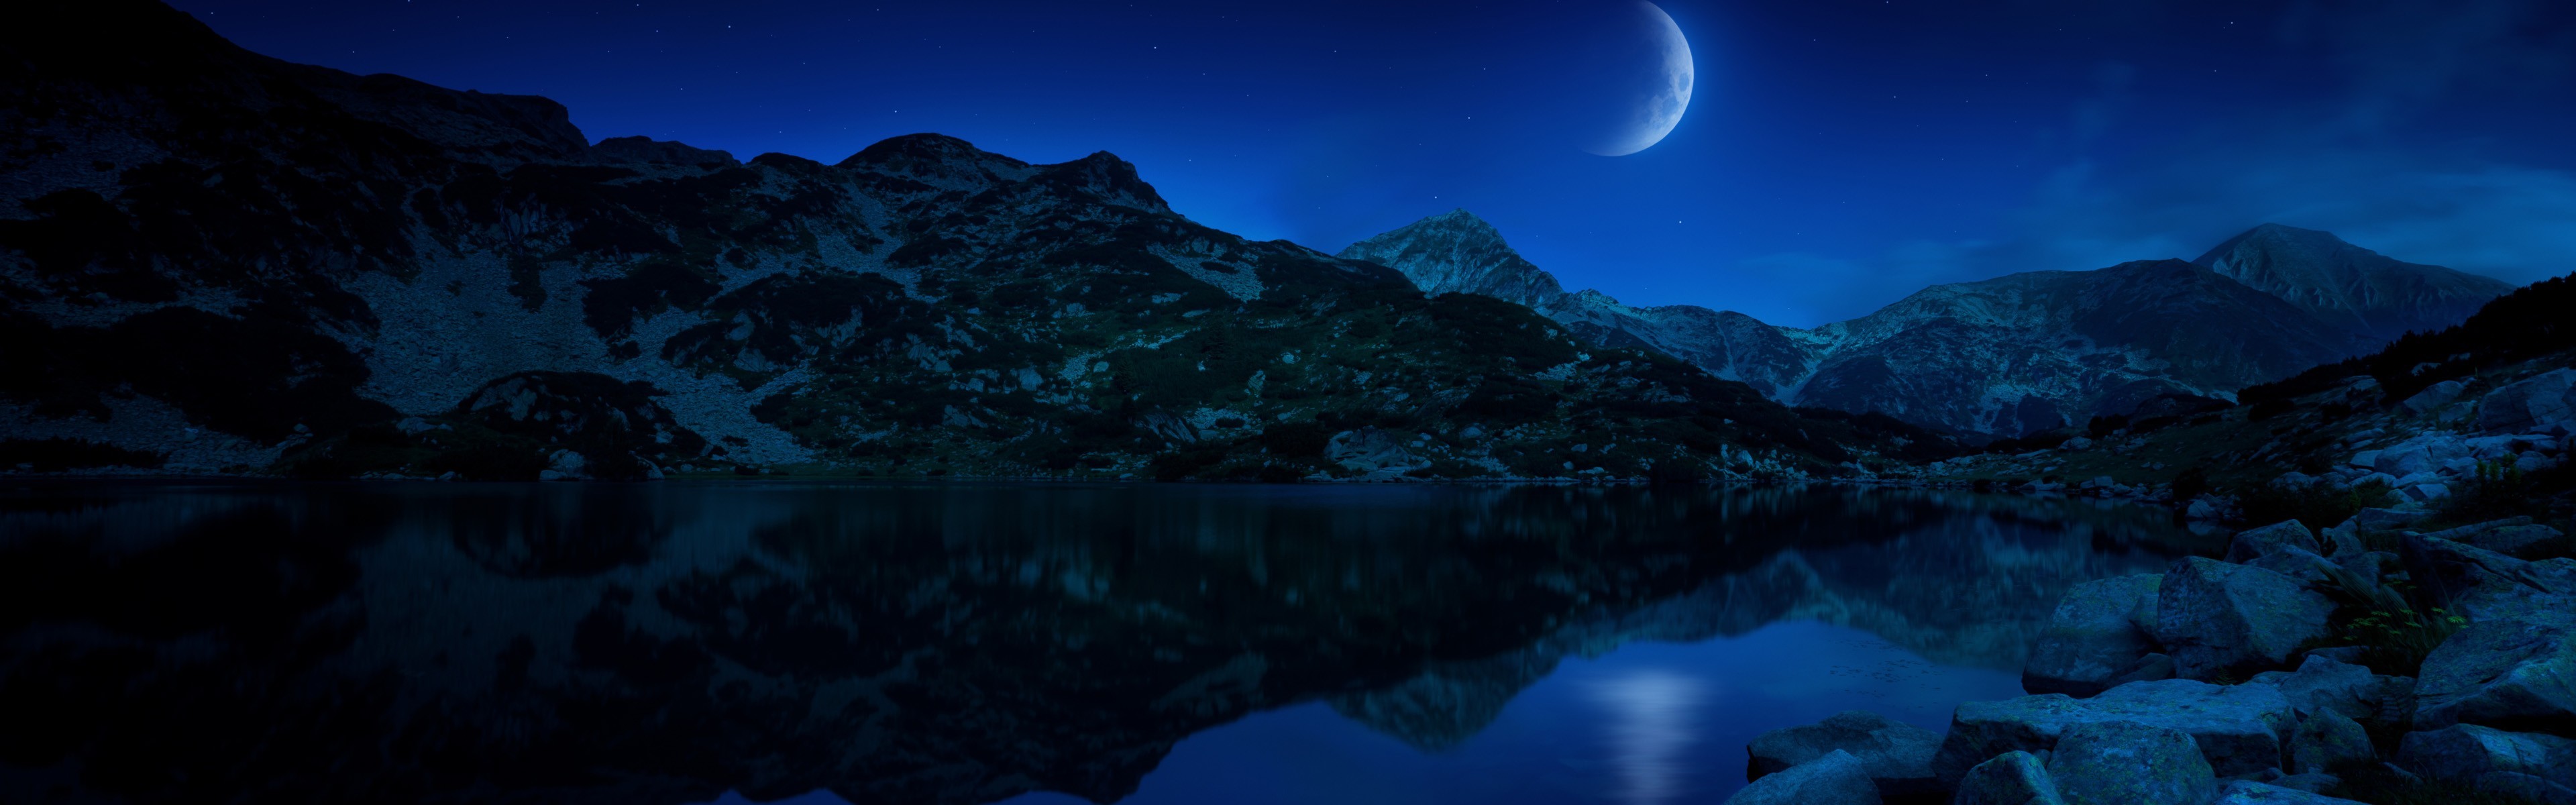 3840x1200 Night Time Wallpapers